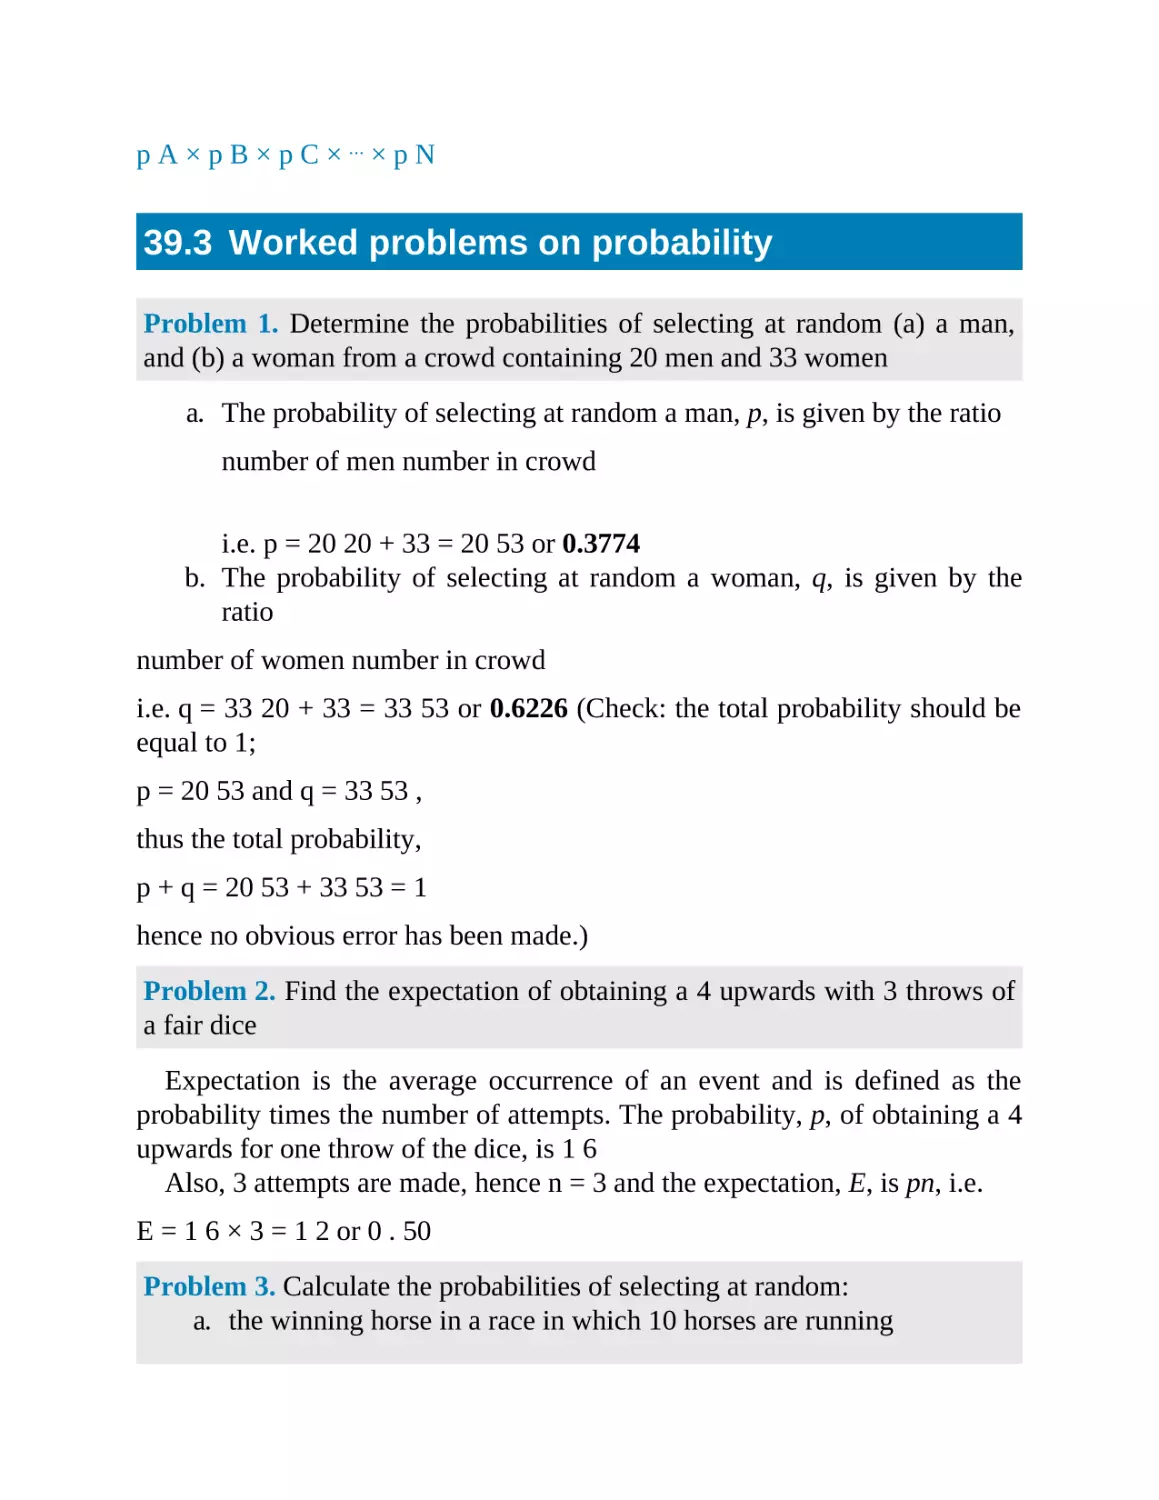 39.3 Worked problems on probability